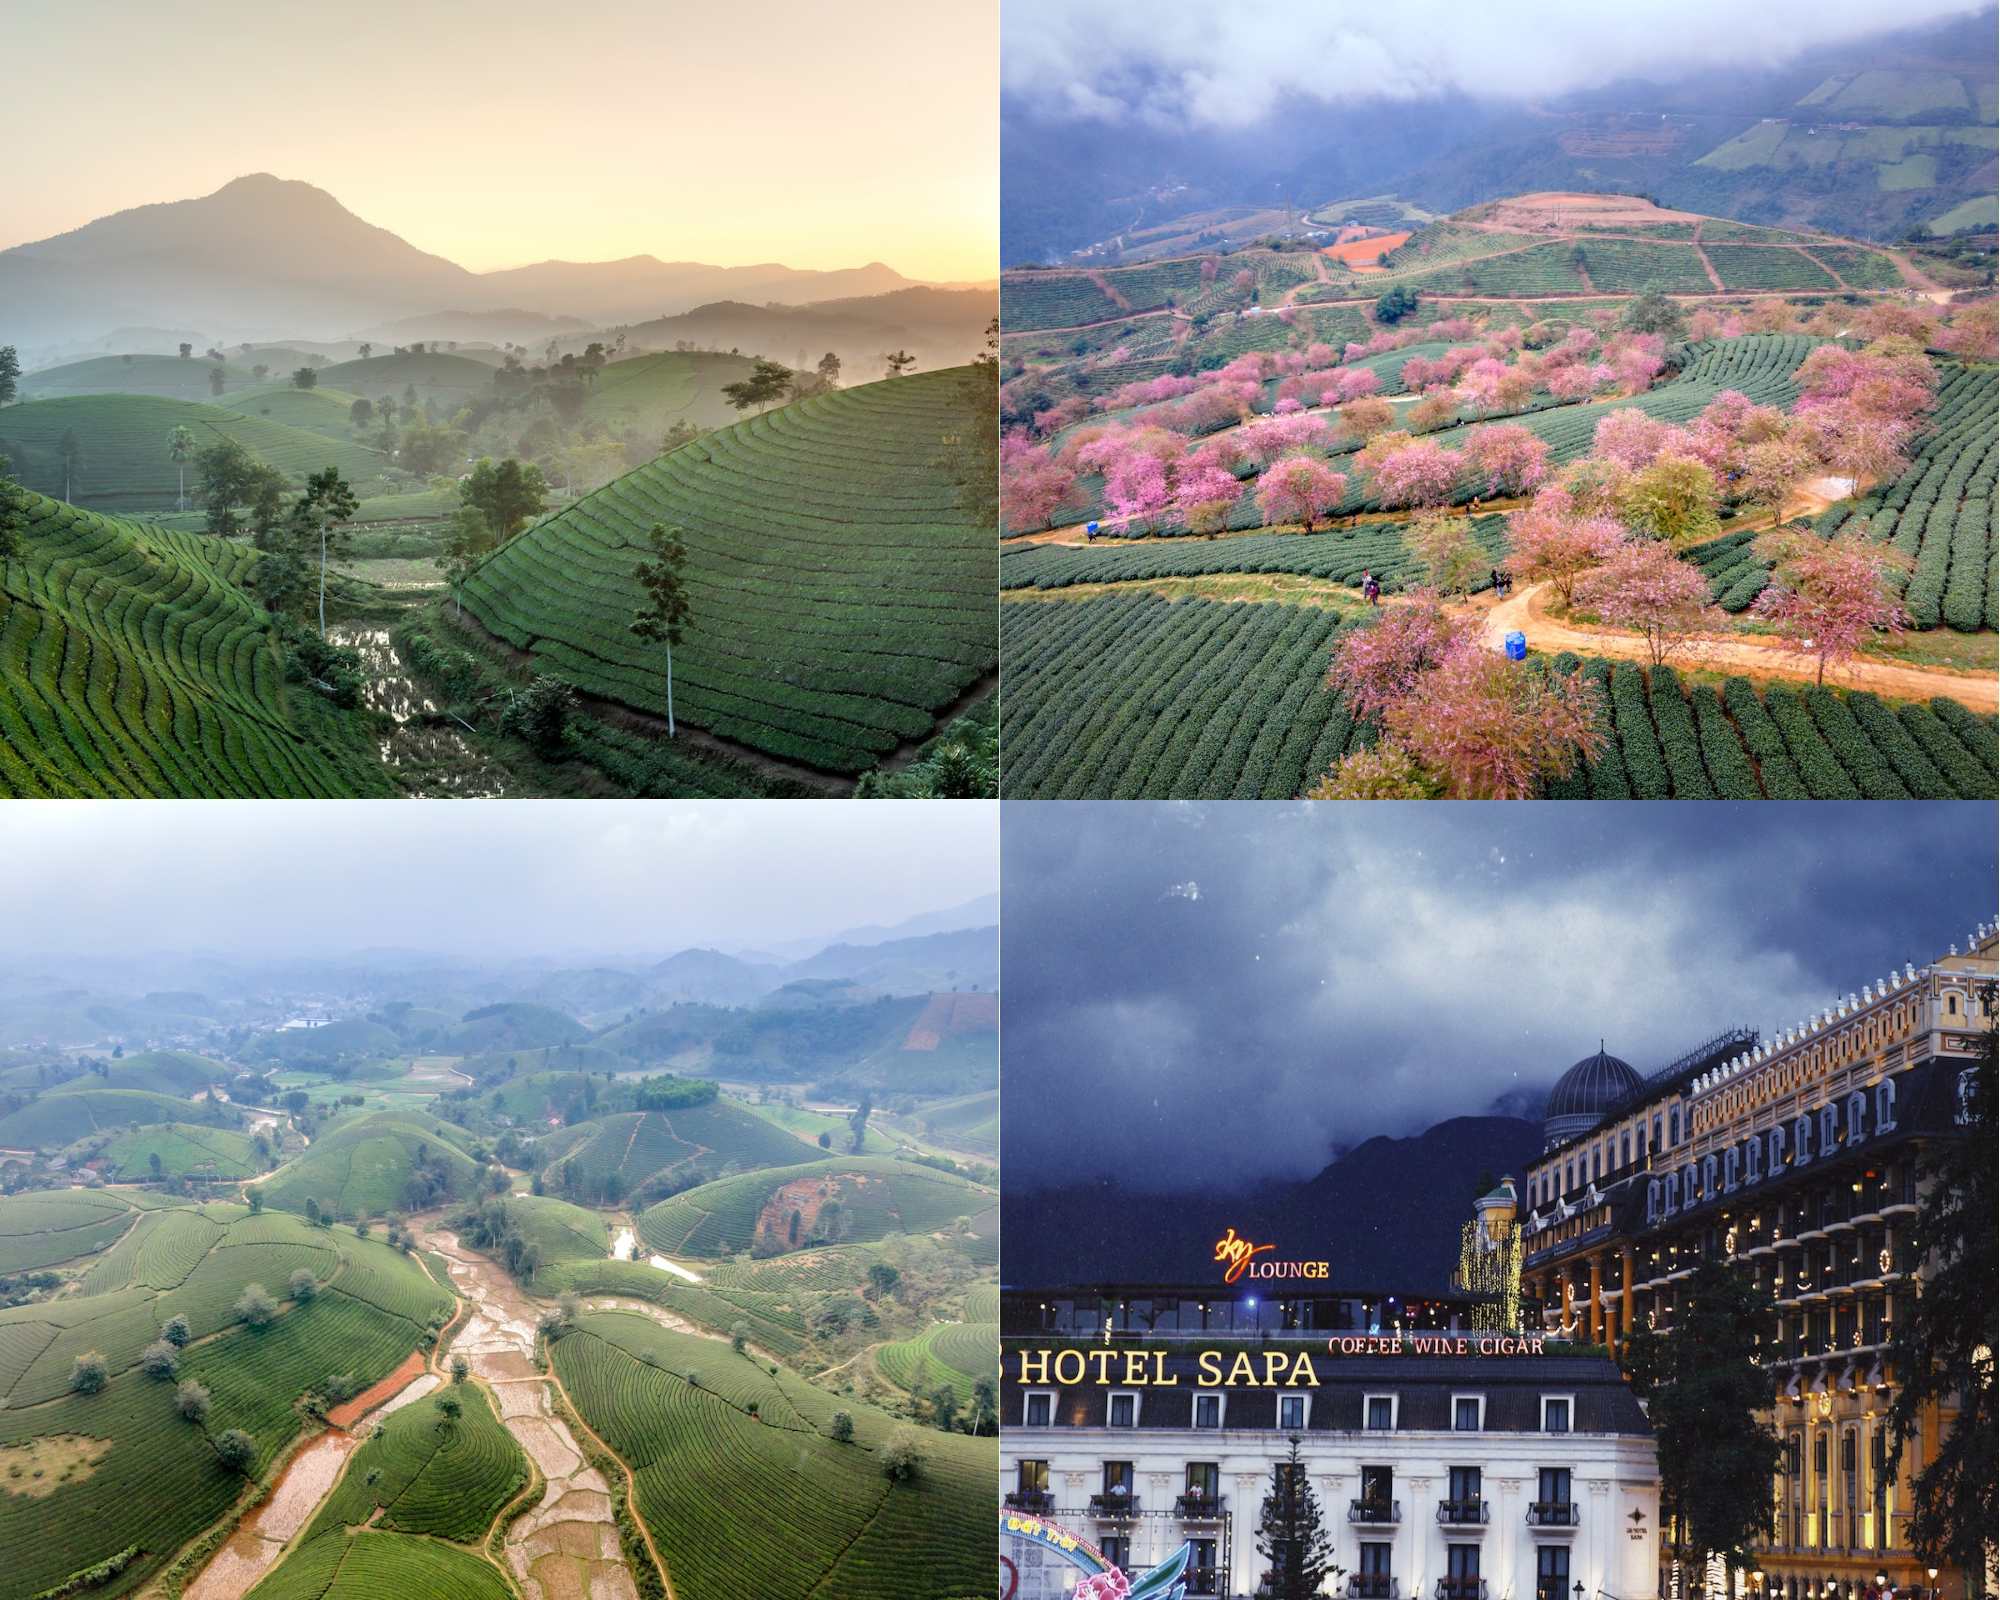 Sapa - A beautiful and romantic land of the North of Vietnam